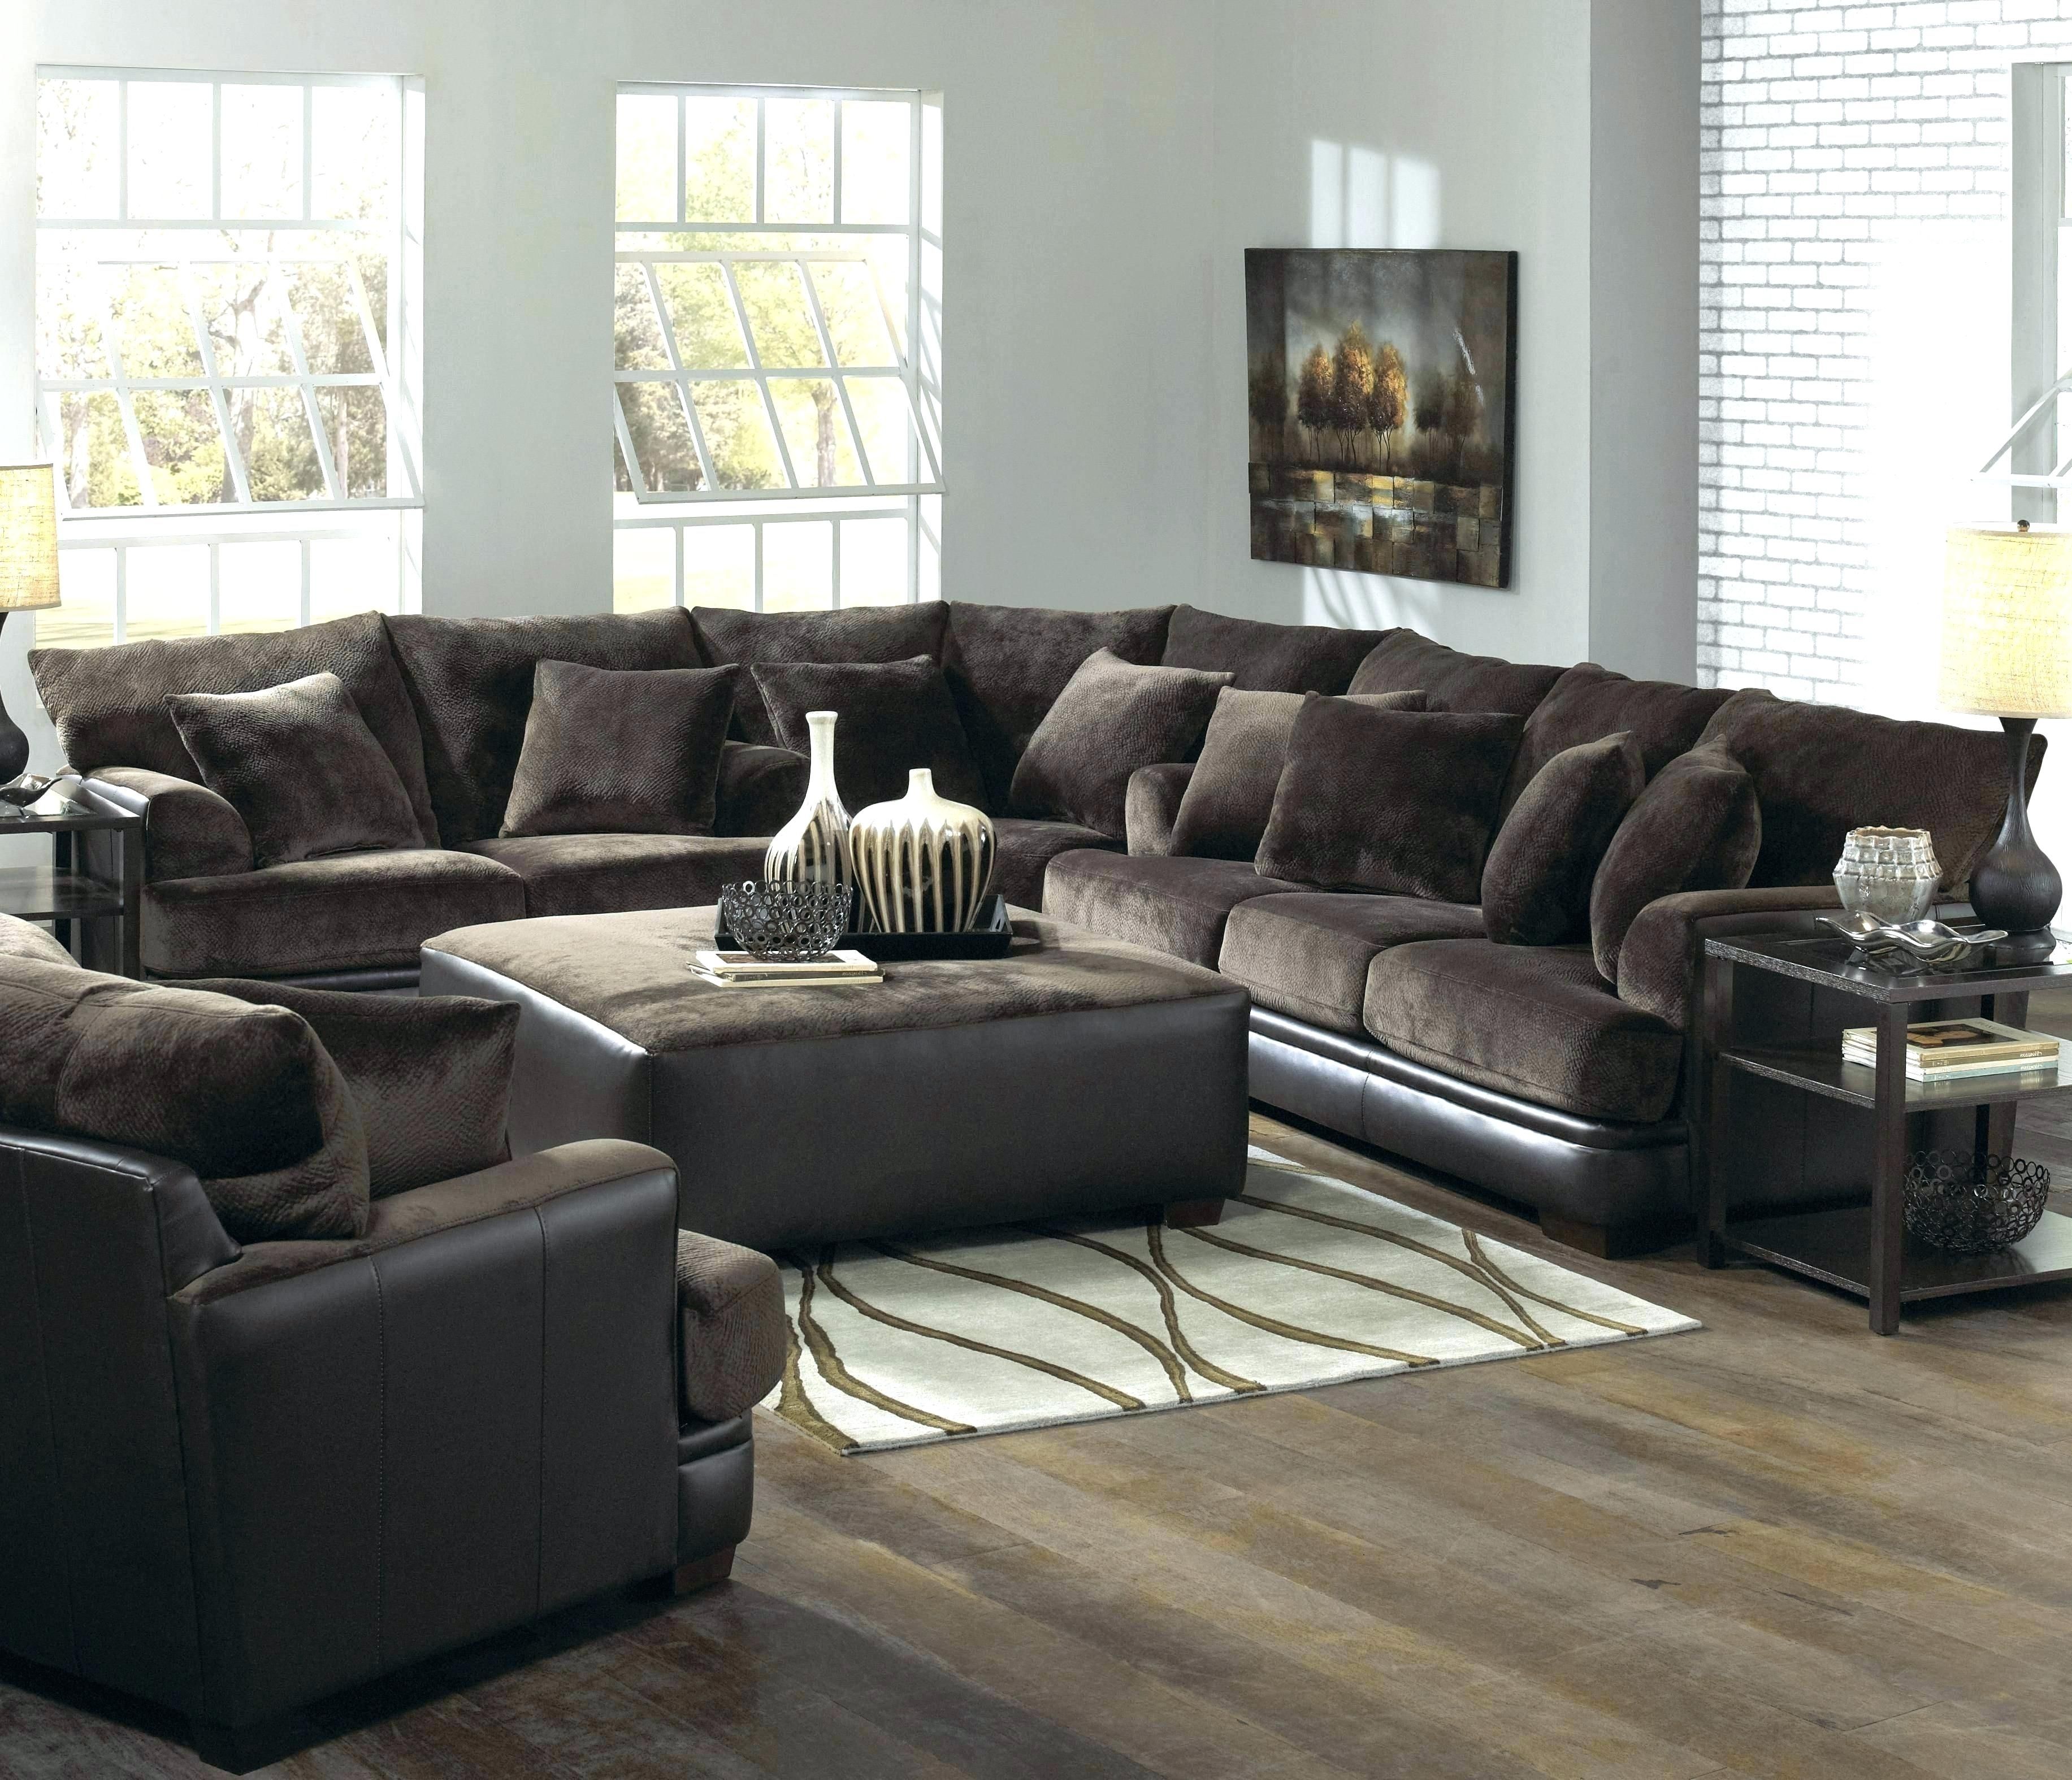 Sectional Sofas For Sale – Stepdesigns Inside Ottawa Sale Sectional Sofas (View 3 of 10)